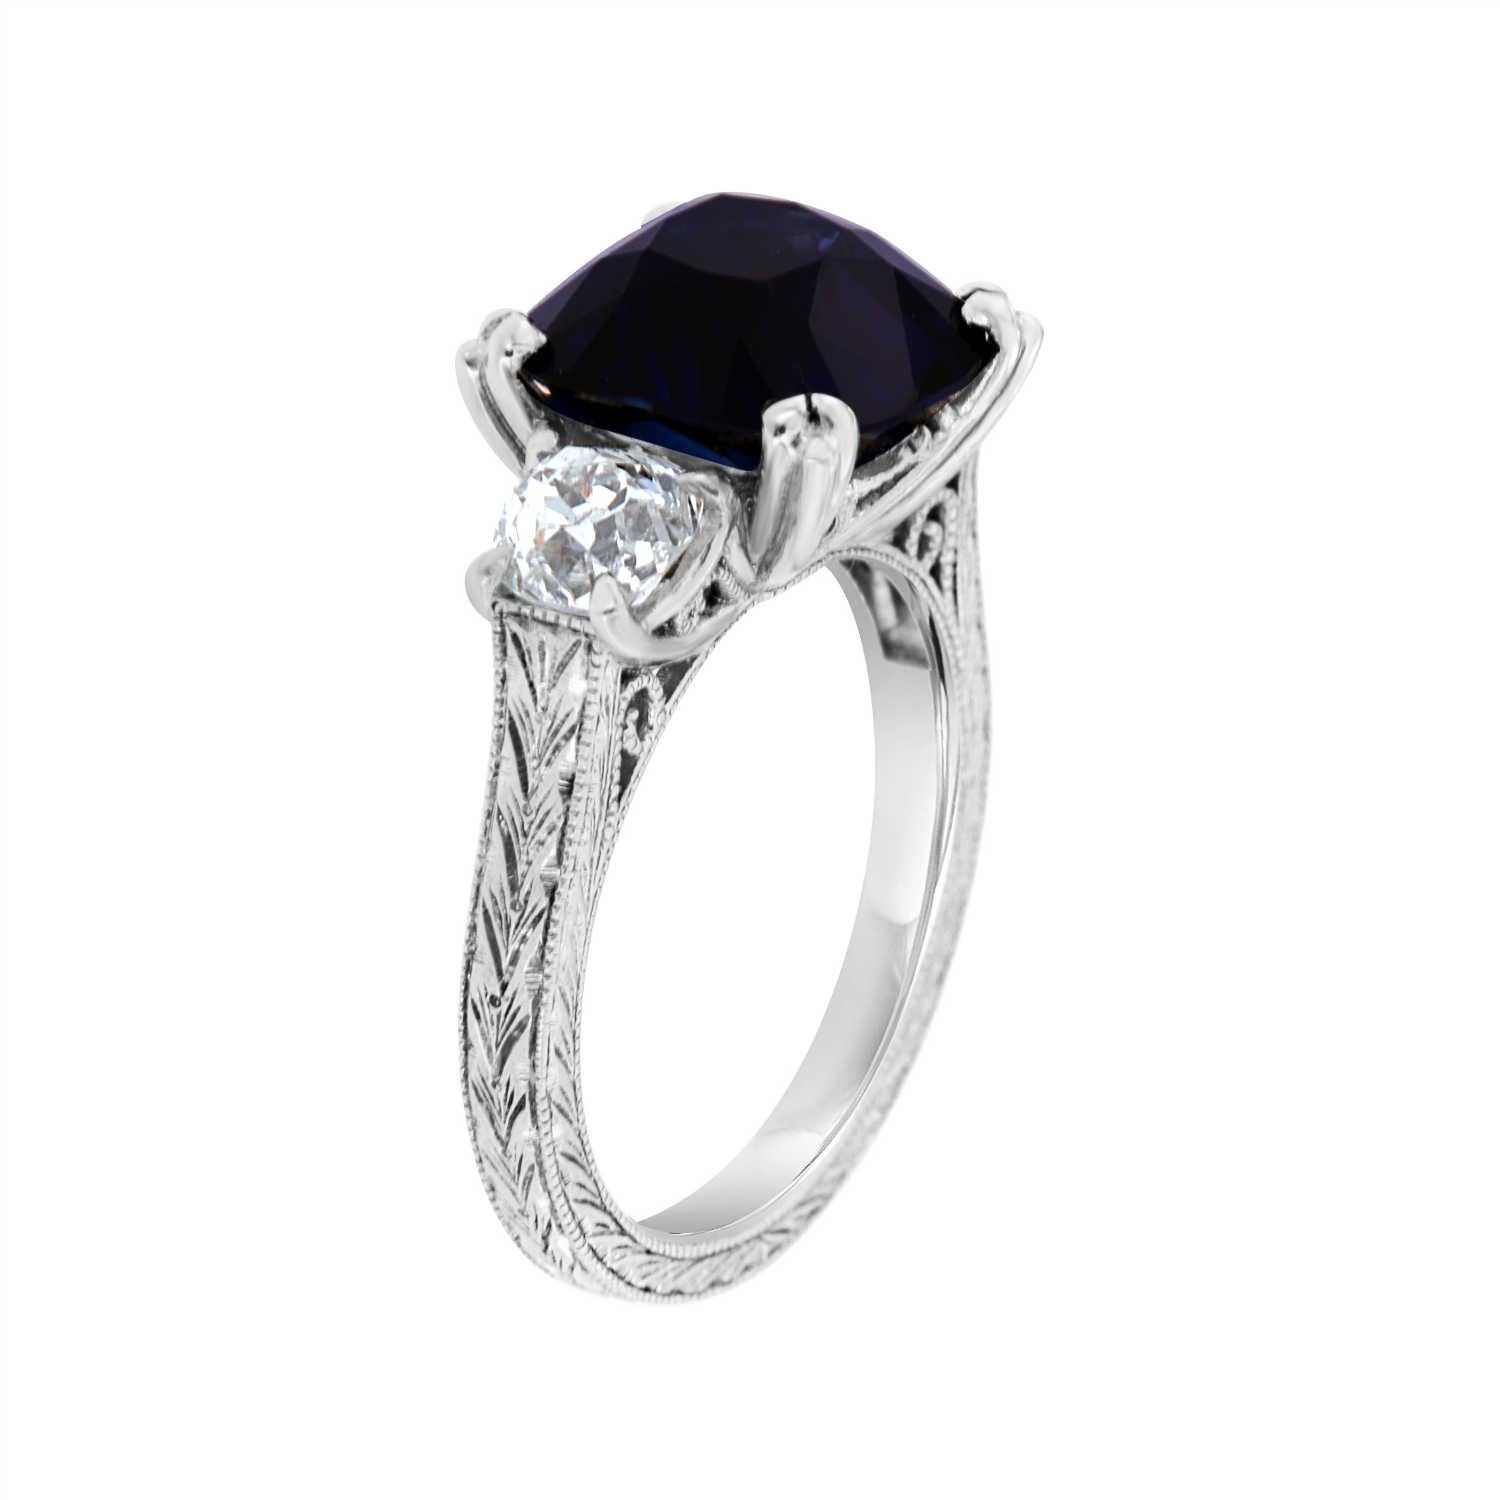 This Platinum Art Deco Estate ring features a 5.66 Carat Royal Blue Natural Antique Cushion shape Sapphire  GIA Certificate 5201103617. Flanked by two old-mine cut diamonds weighing 1.16 Carat GIA certificates 5191781639 and 5191590933. The sapphire